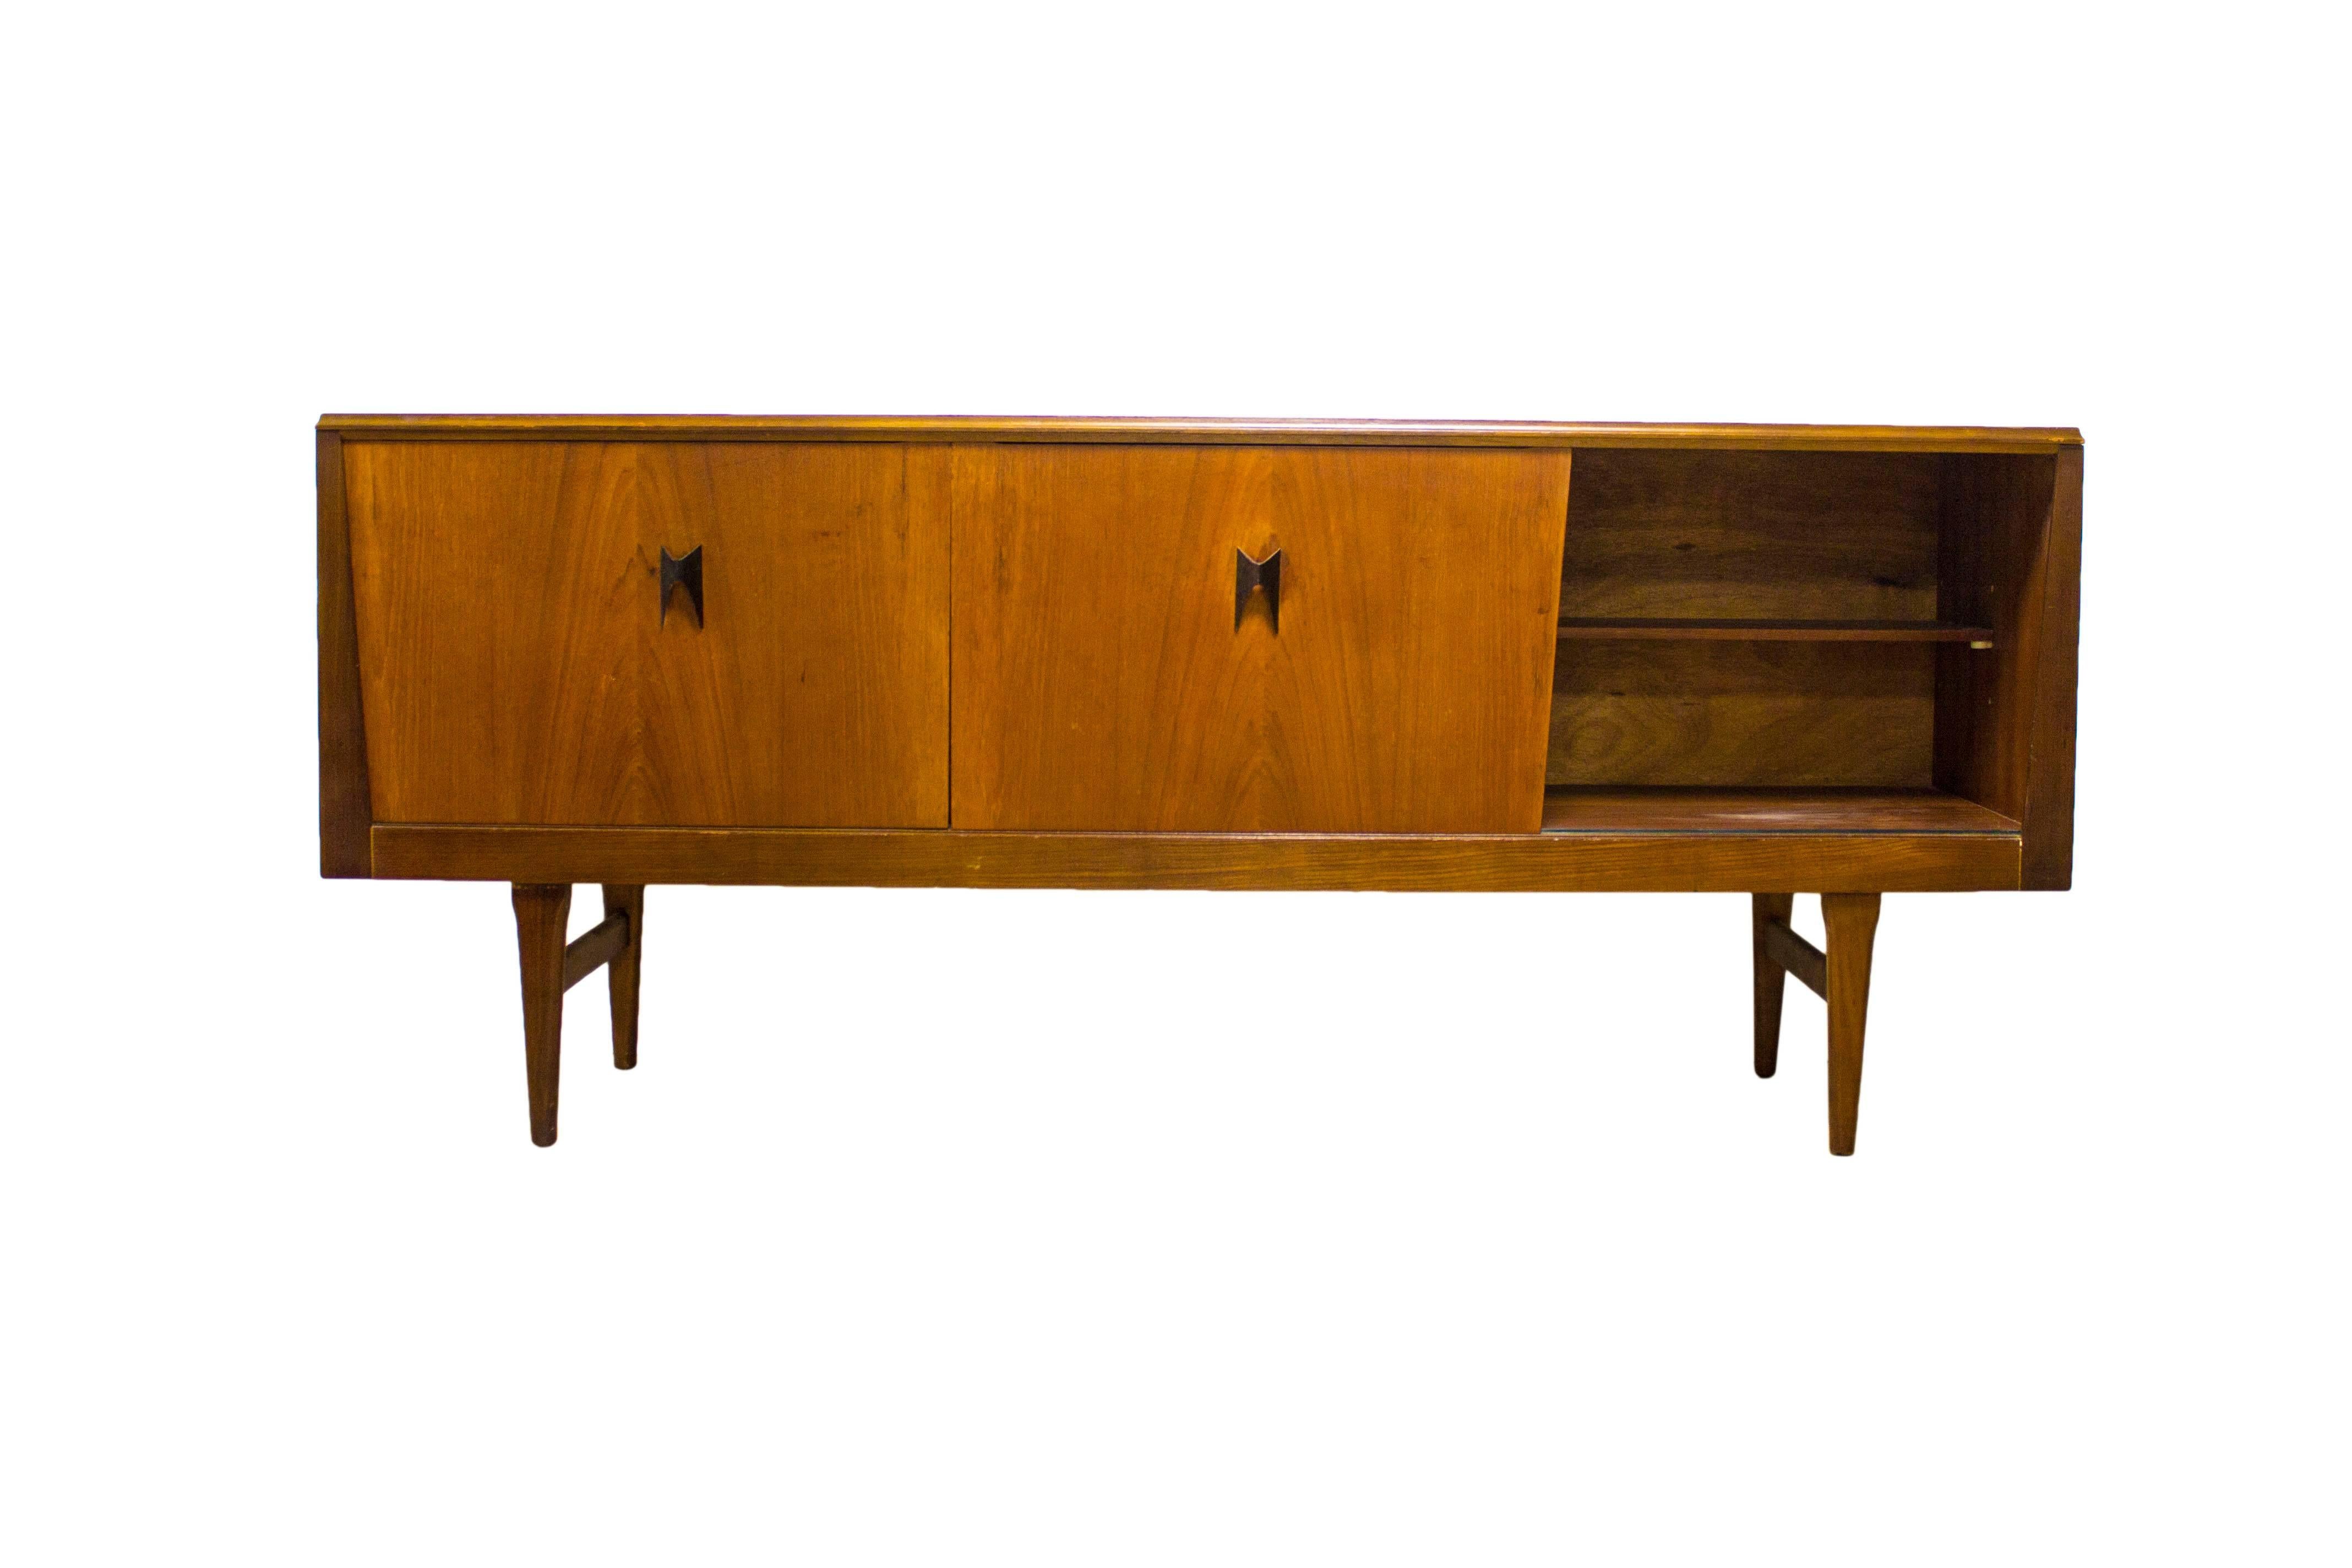 Elliotts of Newbury are undoubtedly one of the most under rated designers of the British midcentury movement with their high quality and beautifully designed furniture taking inspiration from their aeroplane building past coupled with Danish style